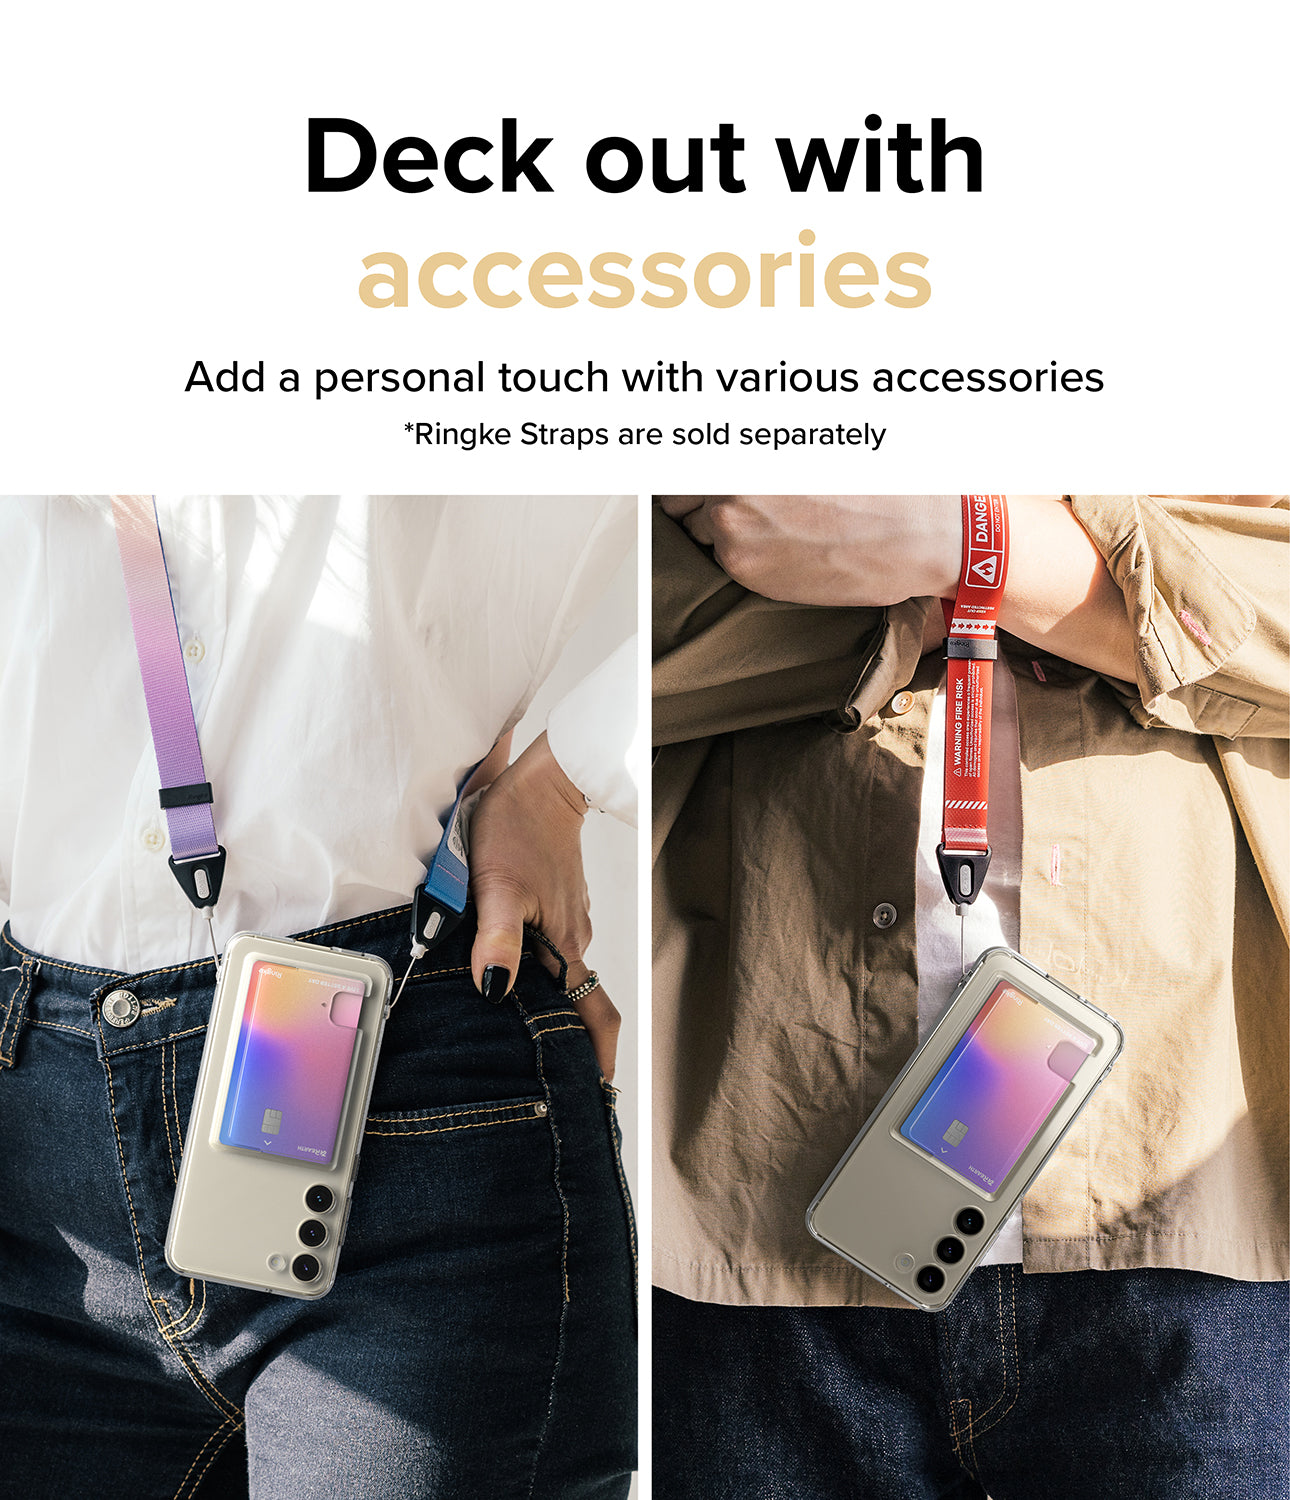 Deck out with accessories l Add a personal touch with various accessories. * Design straps are sold separately.